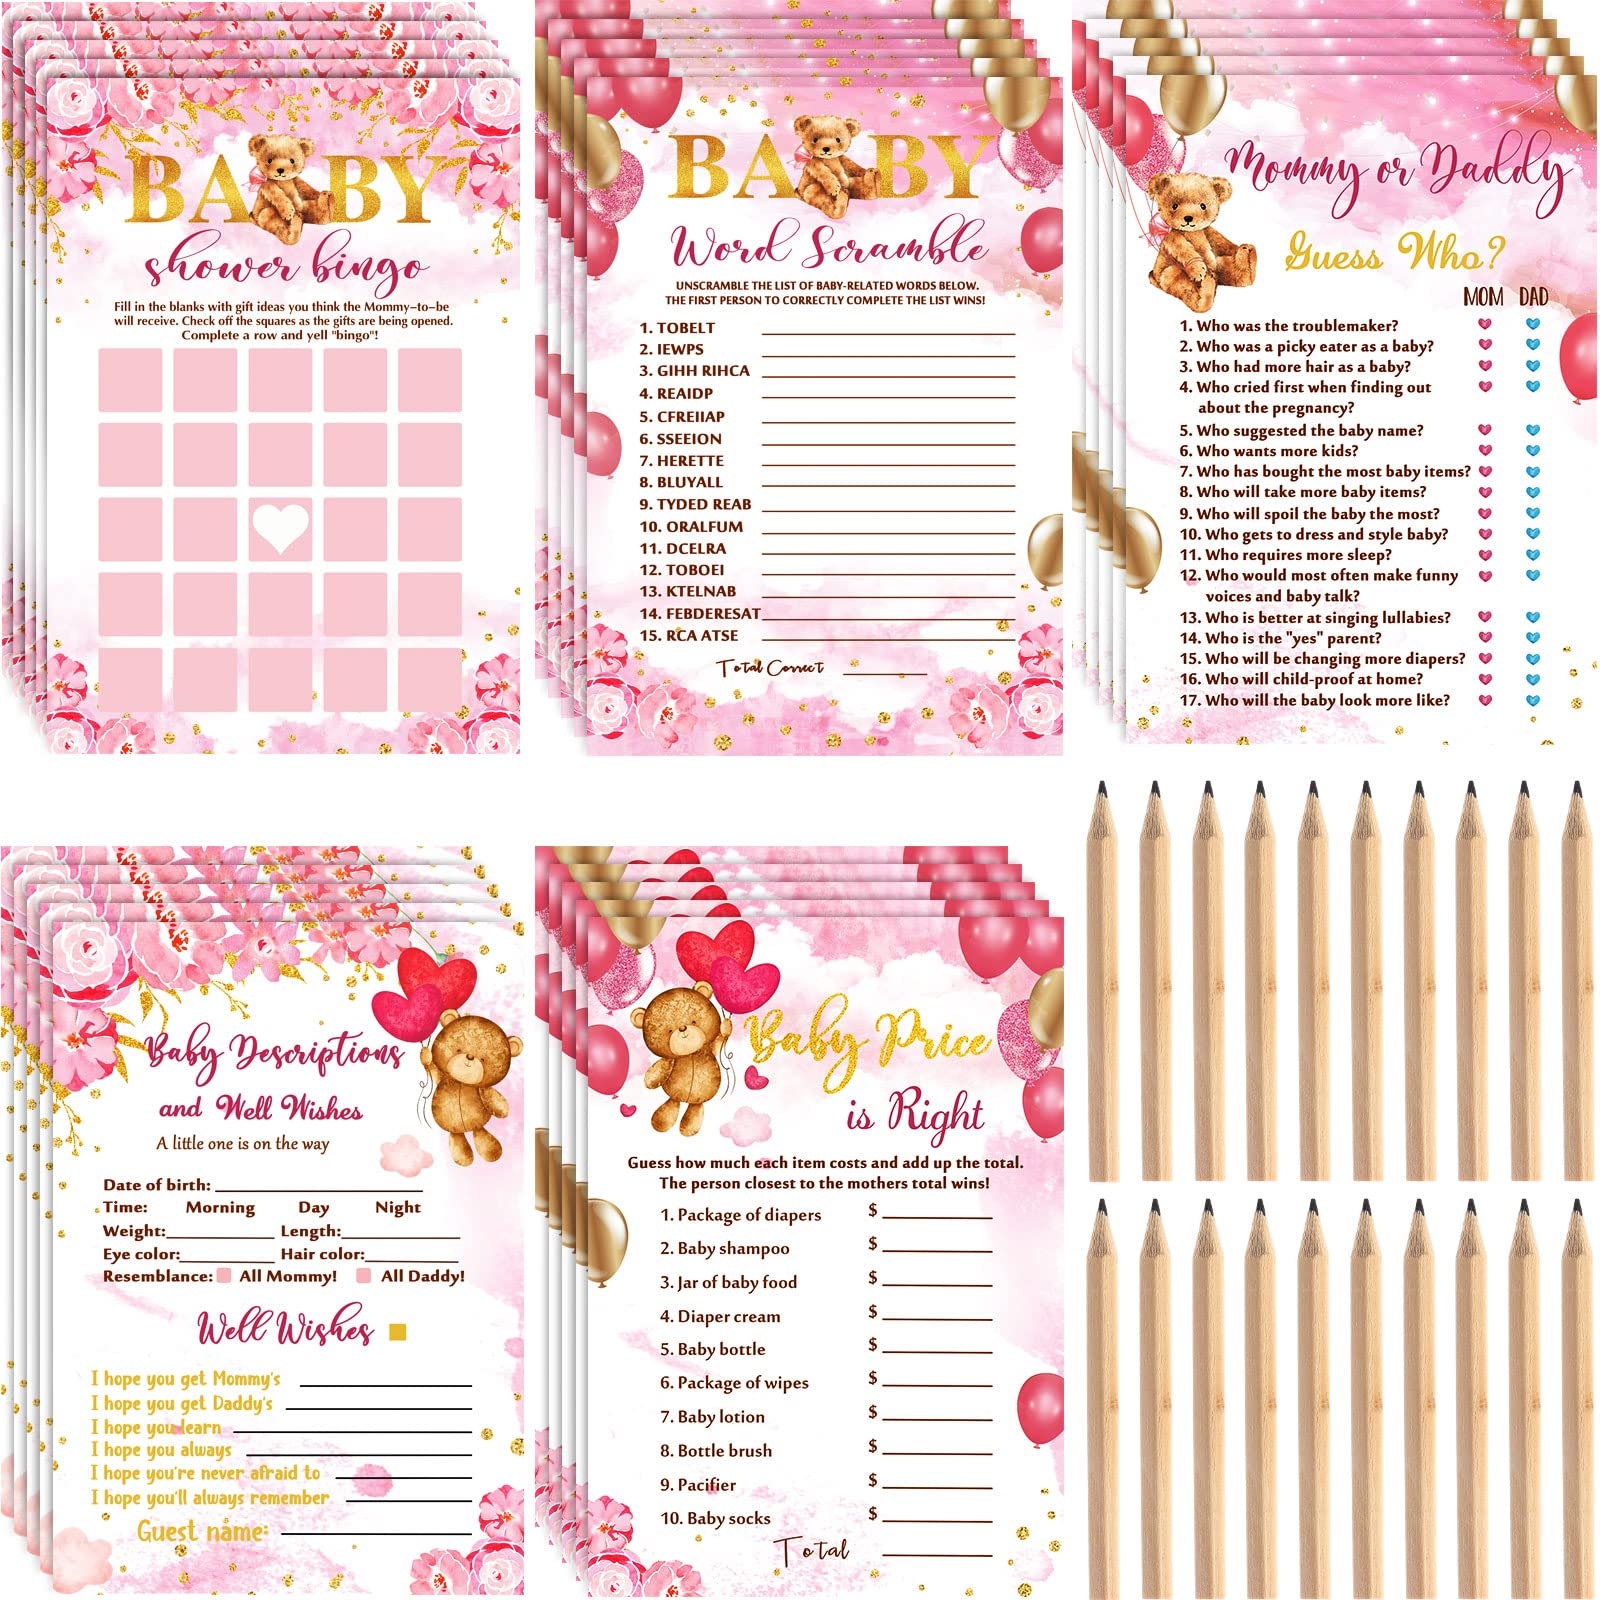 Amazon Bear Baby Shower Games For Boy Or Girl 5 Game Activities 125 Pcs Cards Includes Baby Bingo Description And Well Wishes Guess Who Baby Price Is Right Word Scramble Game Pink - Free Printable Baby Shower Games In Spanish